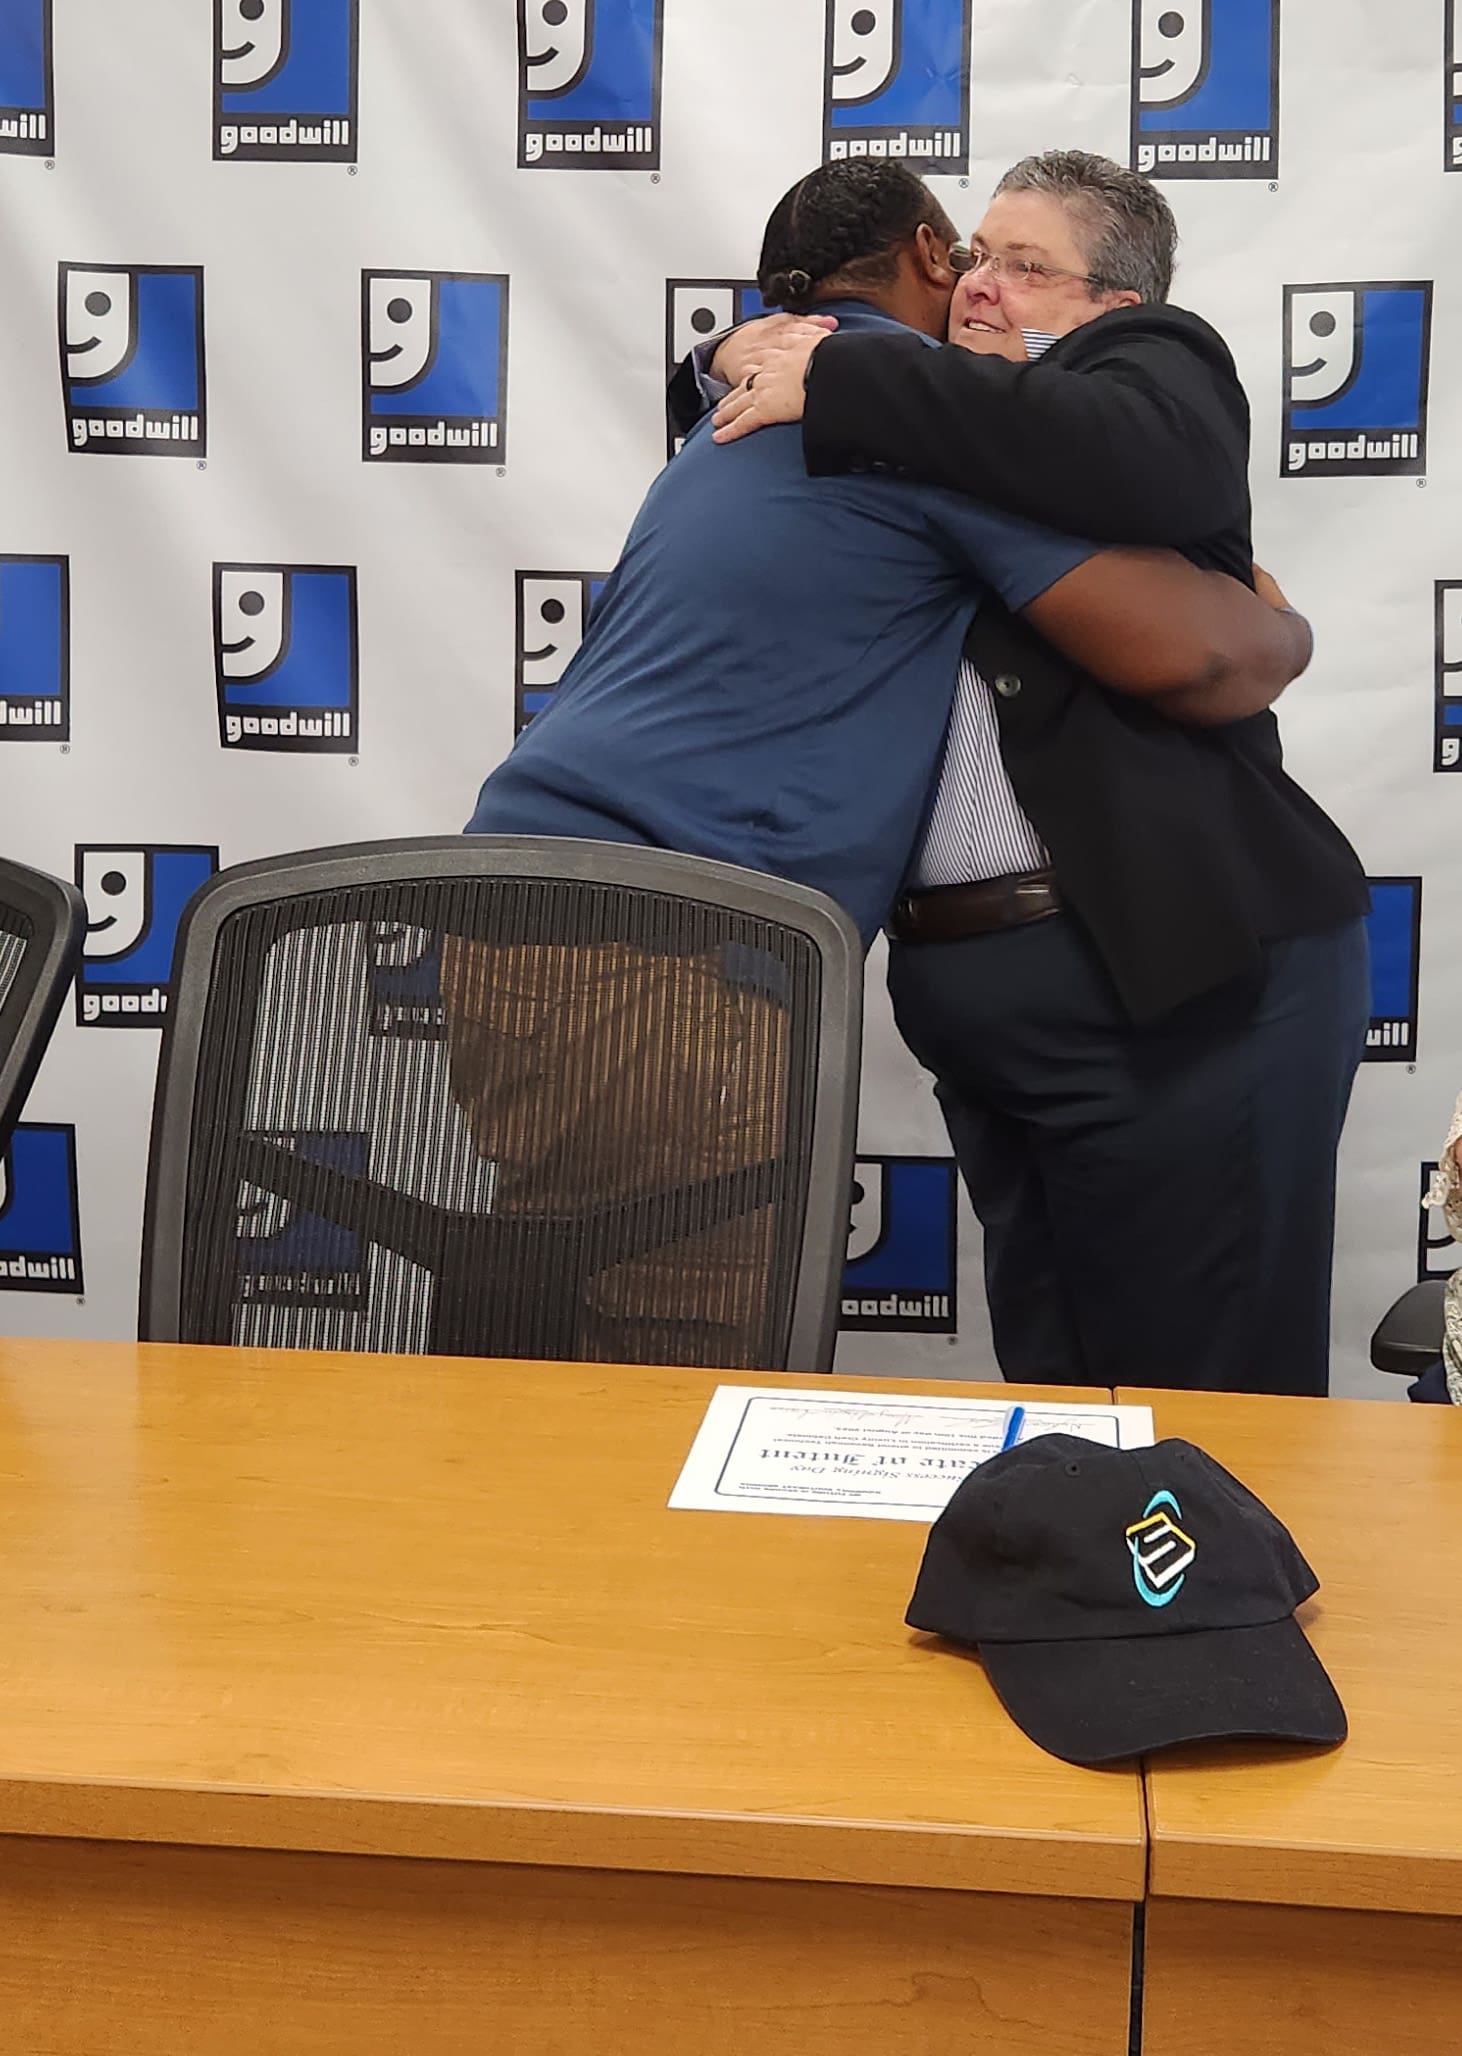 Peggy Burgoon, Manager of Associate Success, hugs Nyheem Houston, a Goodwill Associate, after he announces his academic commitment to Savannah Tech. 